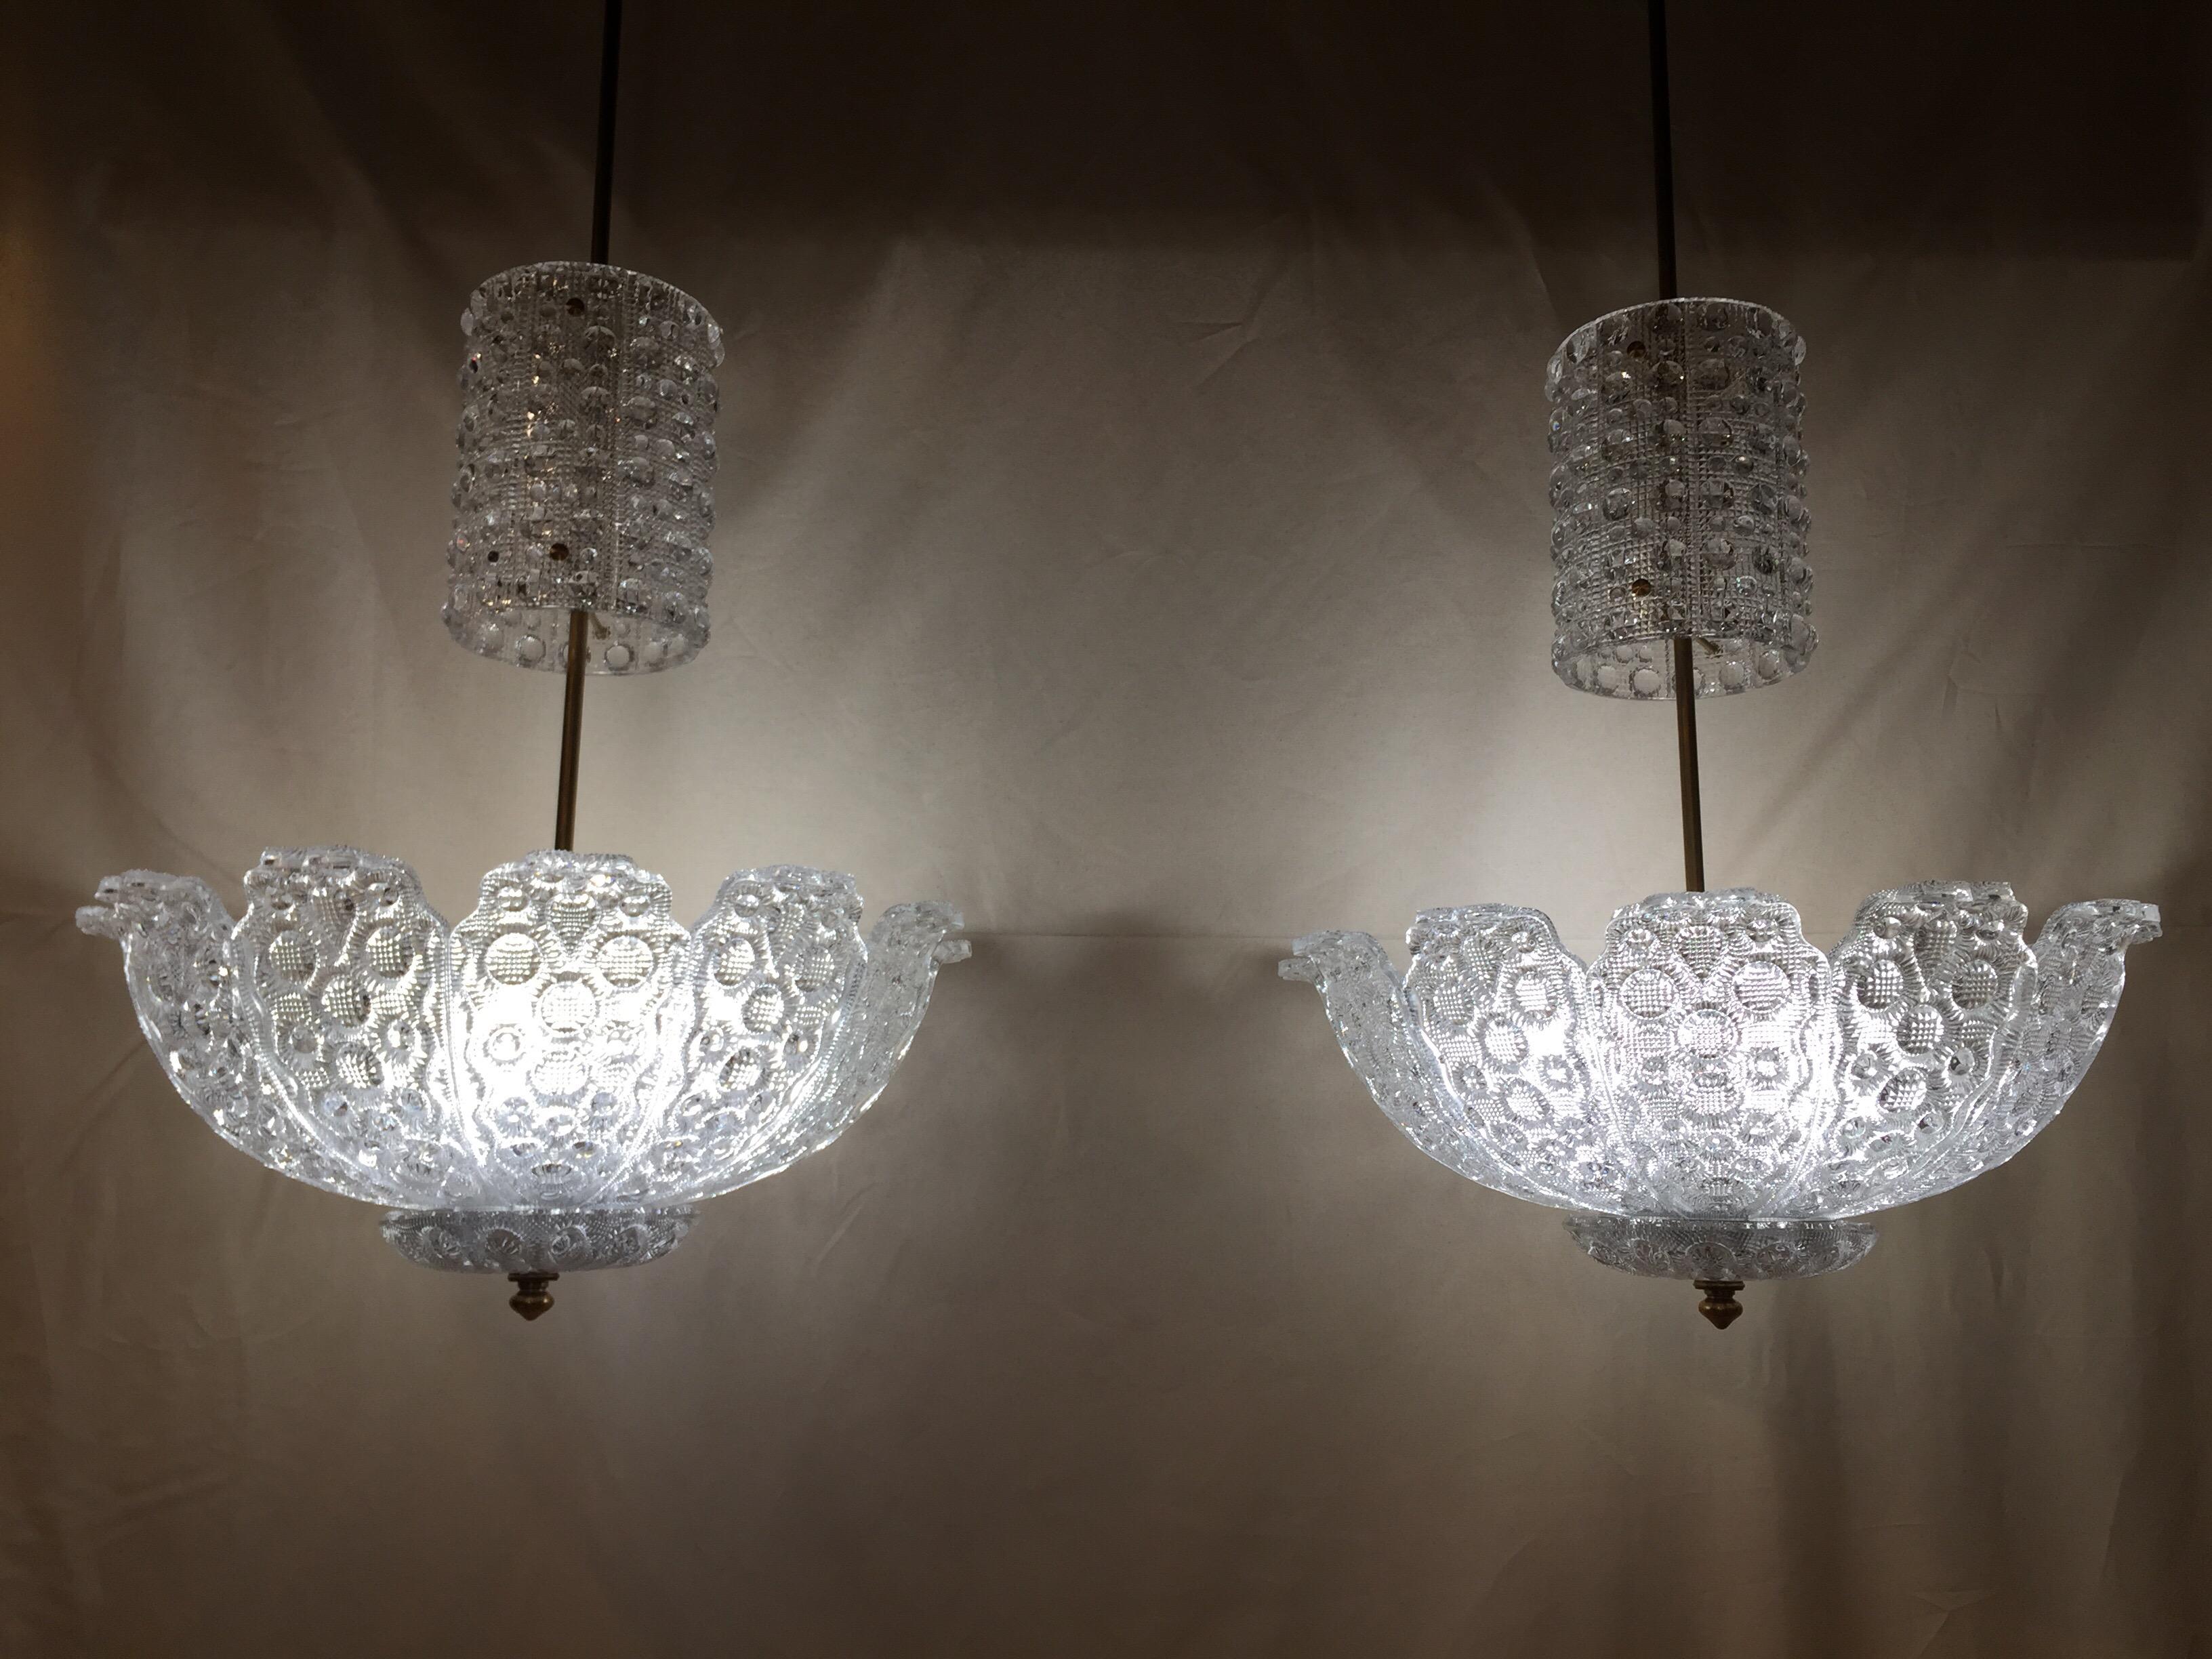 Fabulous Scandinavian big and large chandeliers made in crystal and brass, circa 1940-1950. Flower decor.
Each cup is composed of 12 petals and has three bulbs (see last picture). Both are in perfect condition. 

Measures: Total height up to the